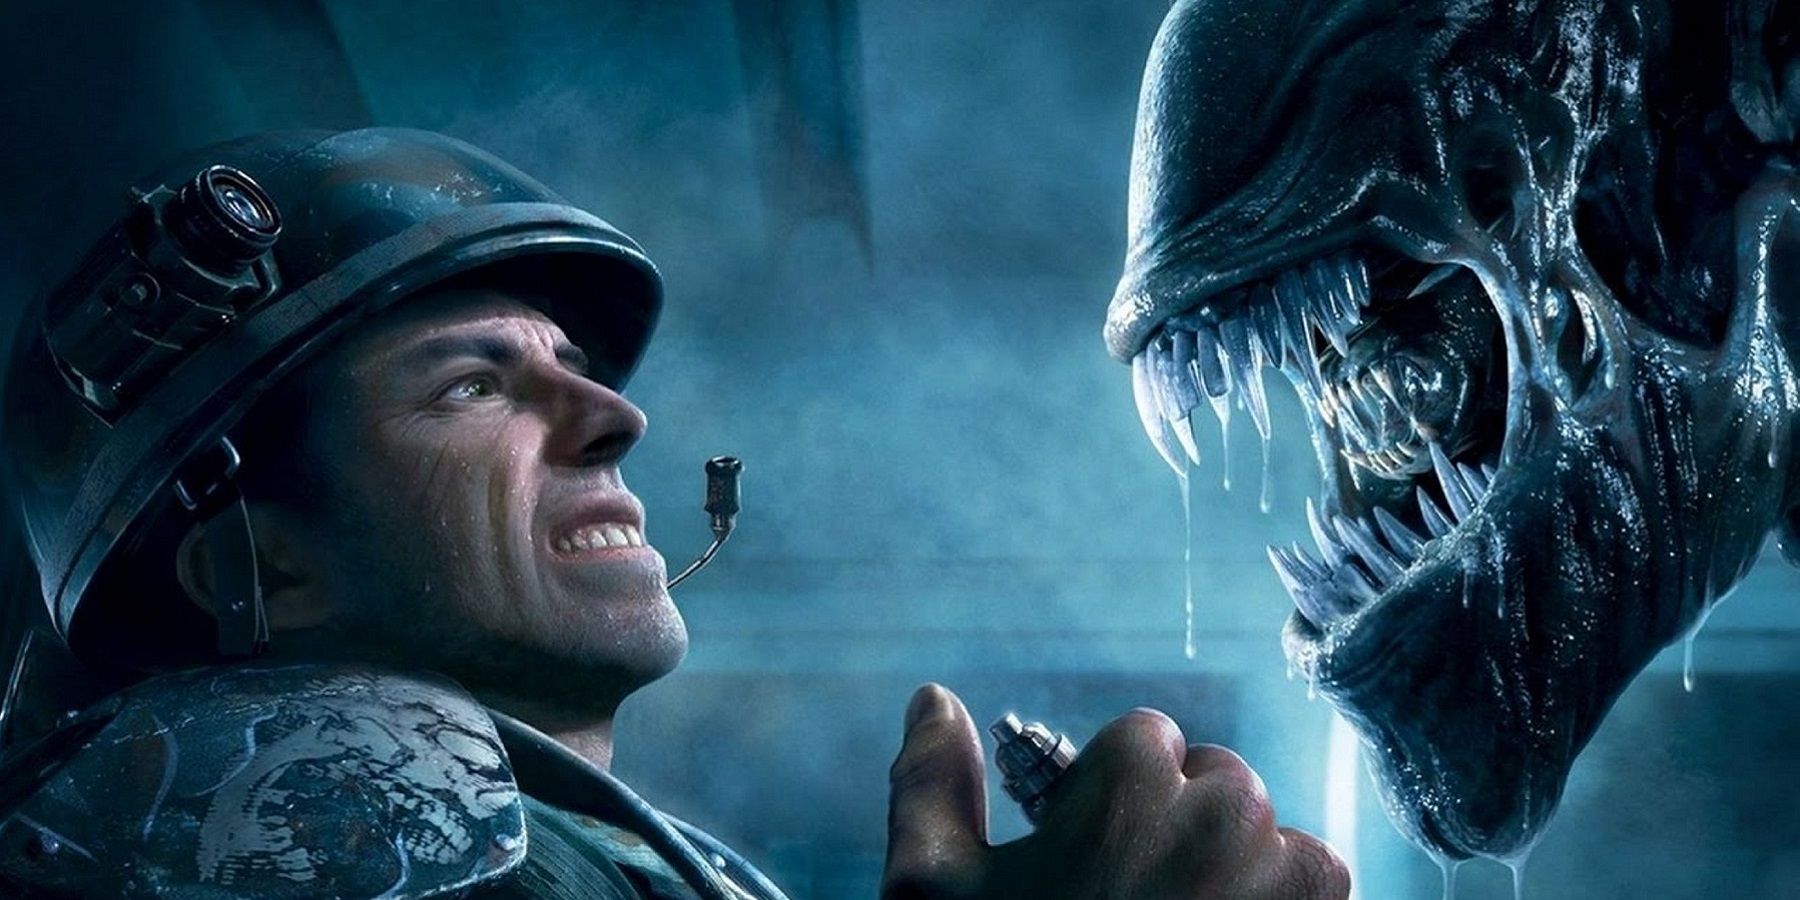 Artwork from Aliens: Colonial Marine showing an Xenomorph approaching a soldier as he is about to detonate a bomb.